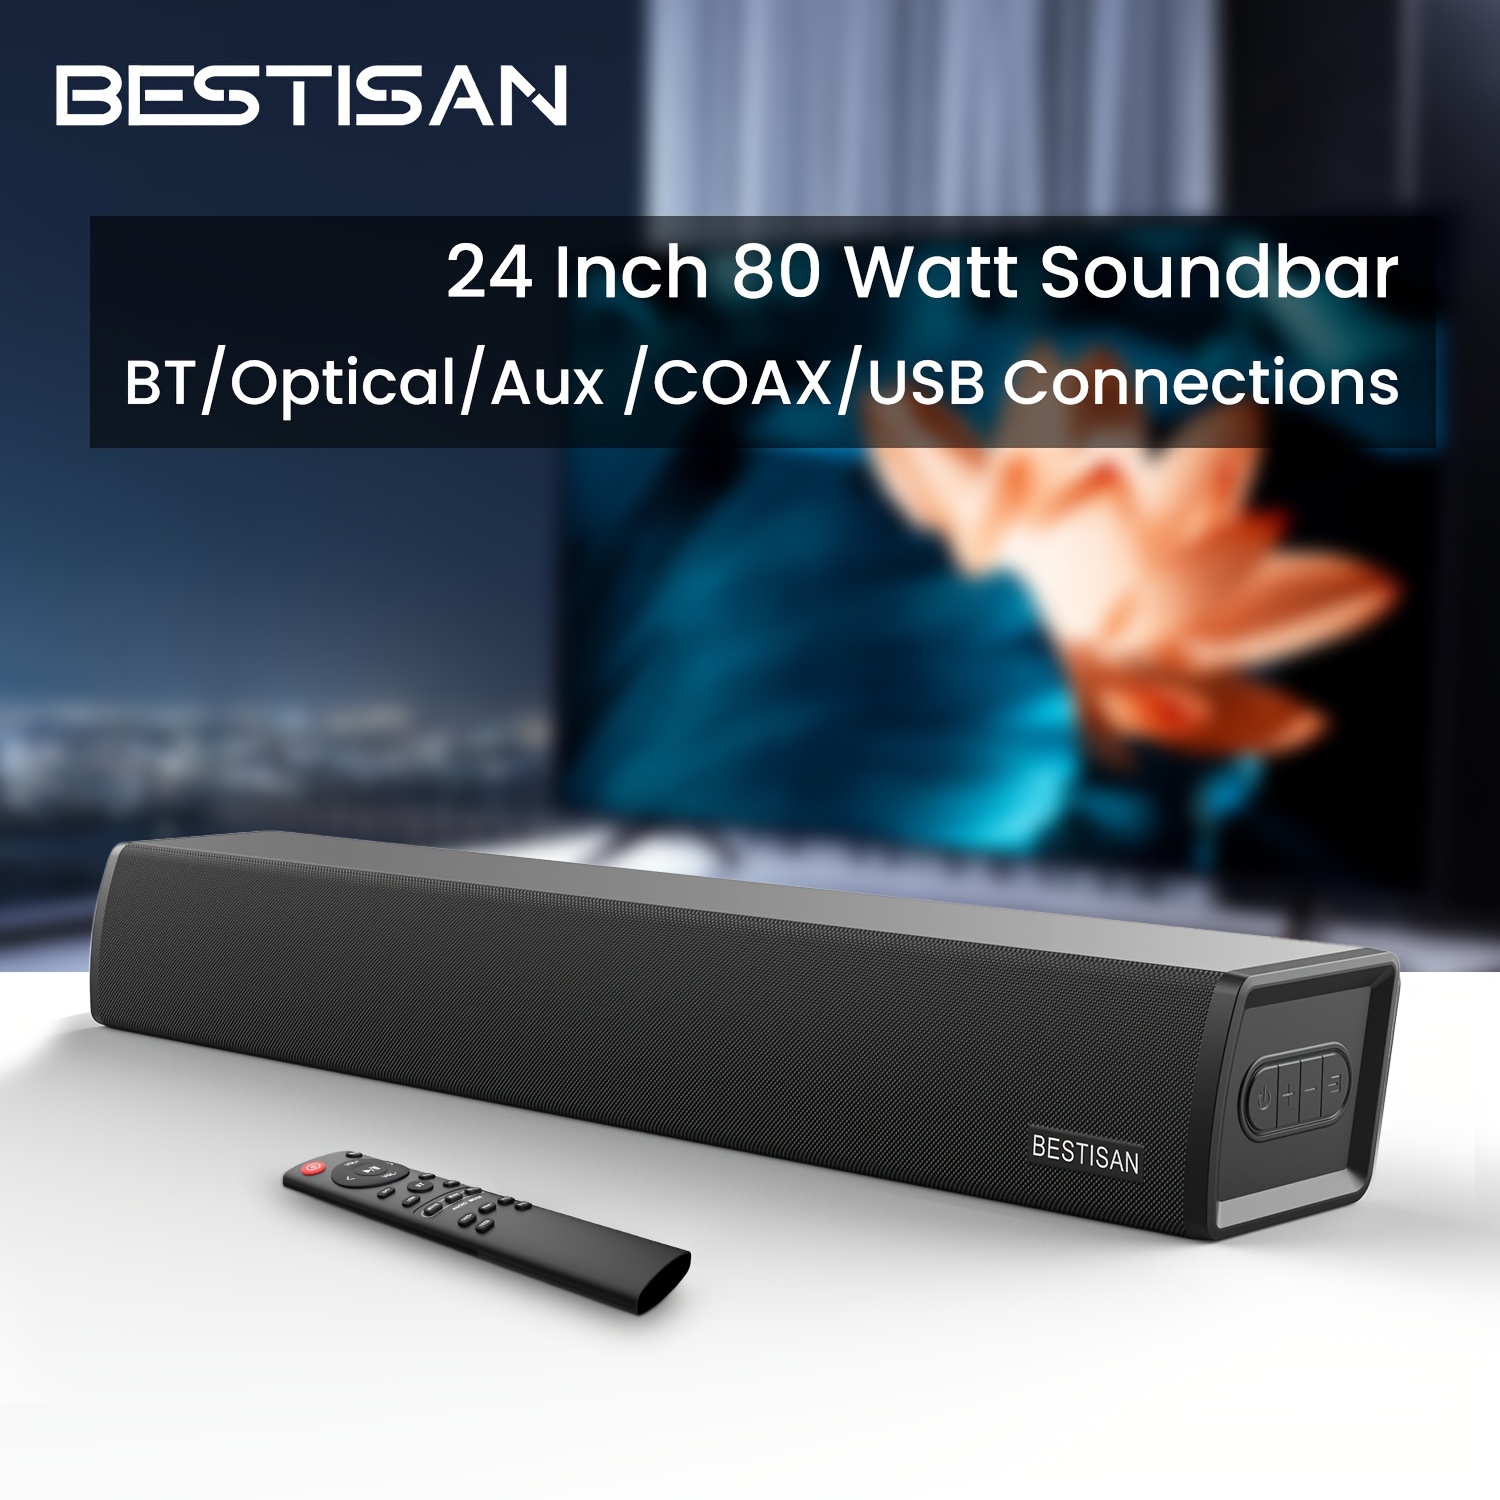 

Sound Bar, Bestisan Tv Soundbar Wired And Wireless Bt 5.0 Speaker, 80w Sound Bar Home Audio System For Tv, 24 Inch, Wall Mounted, Treble/bass Adjustable